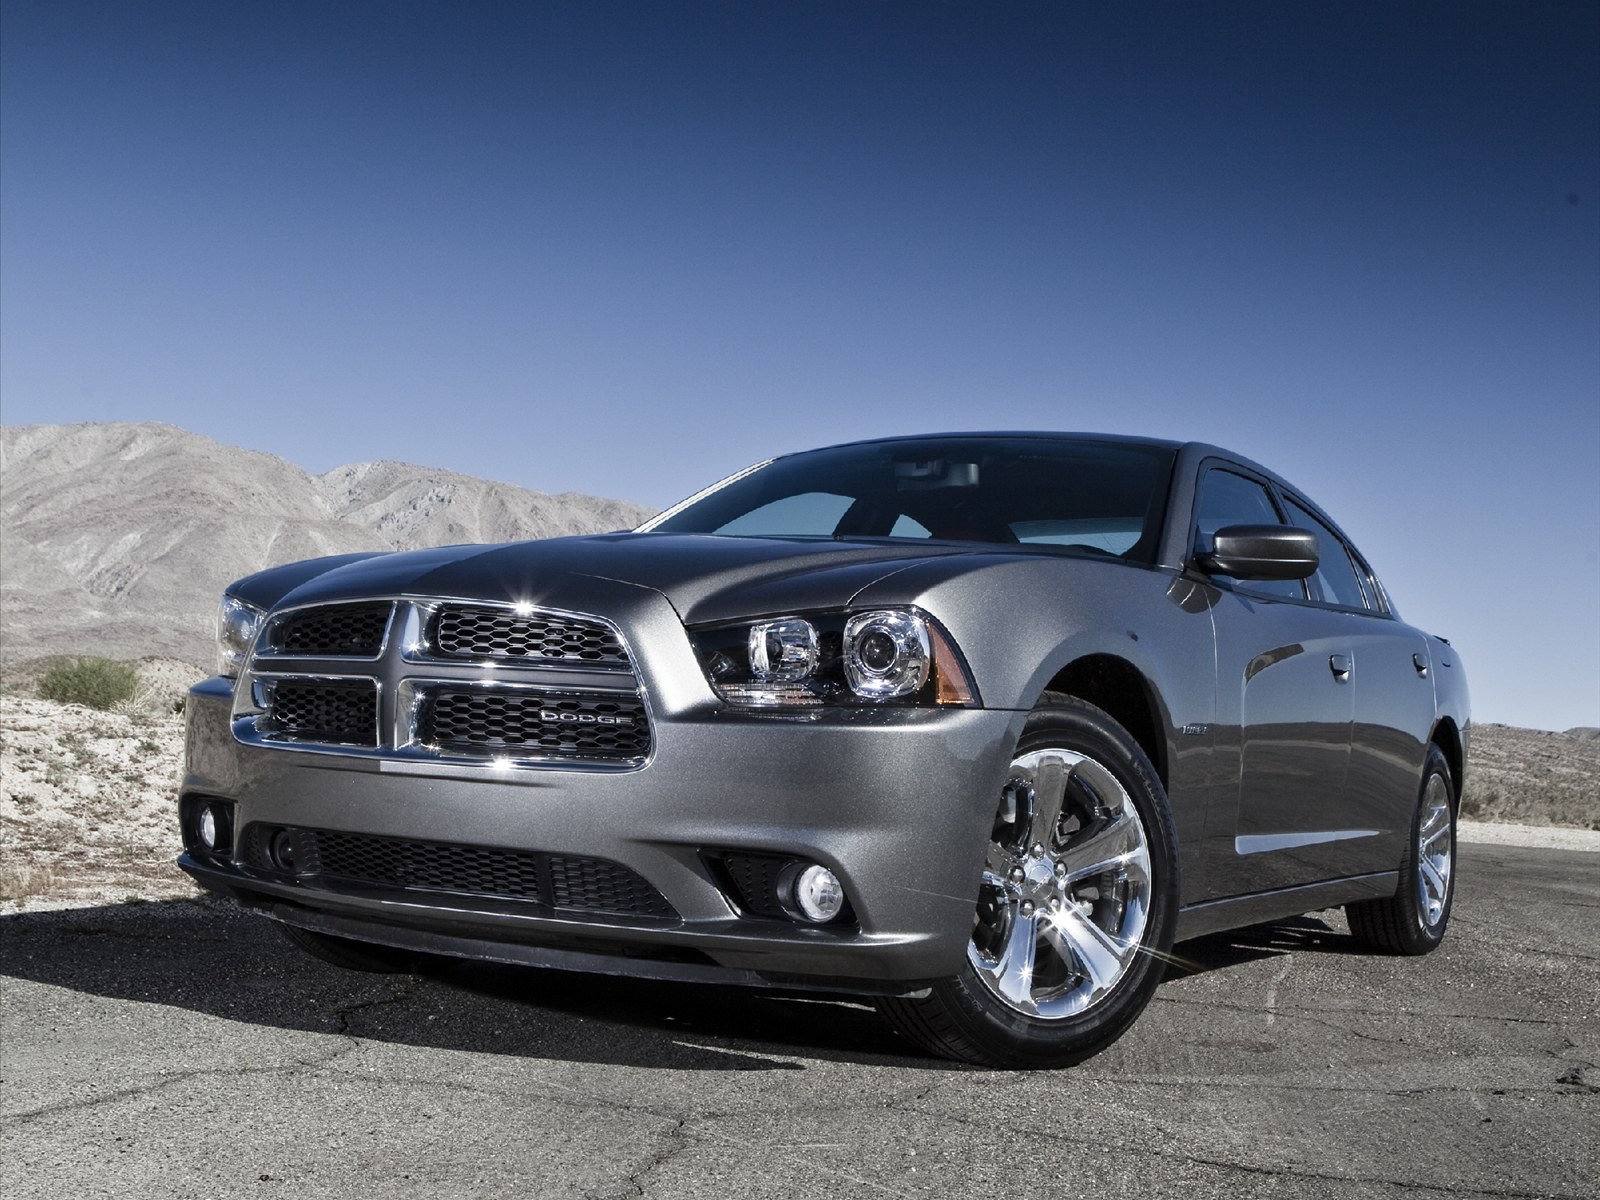 2012 Dodge Charger 3.6 Performance Upgrades